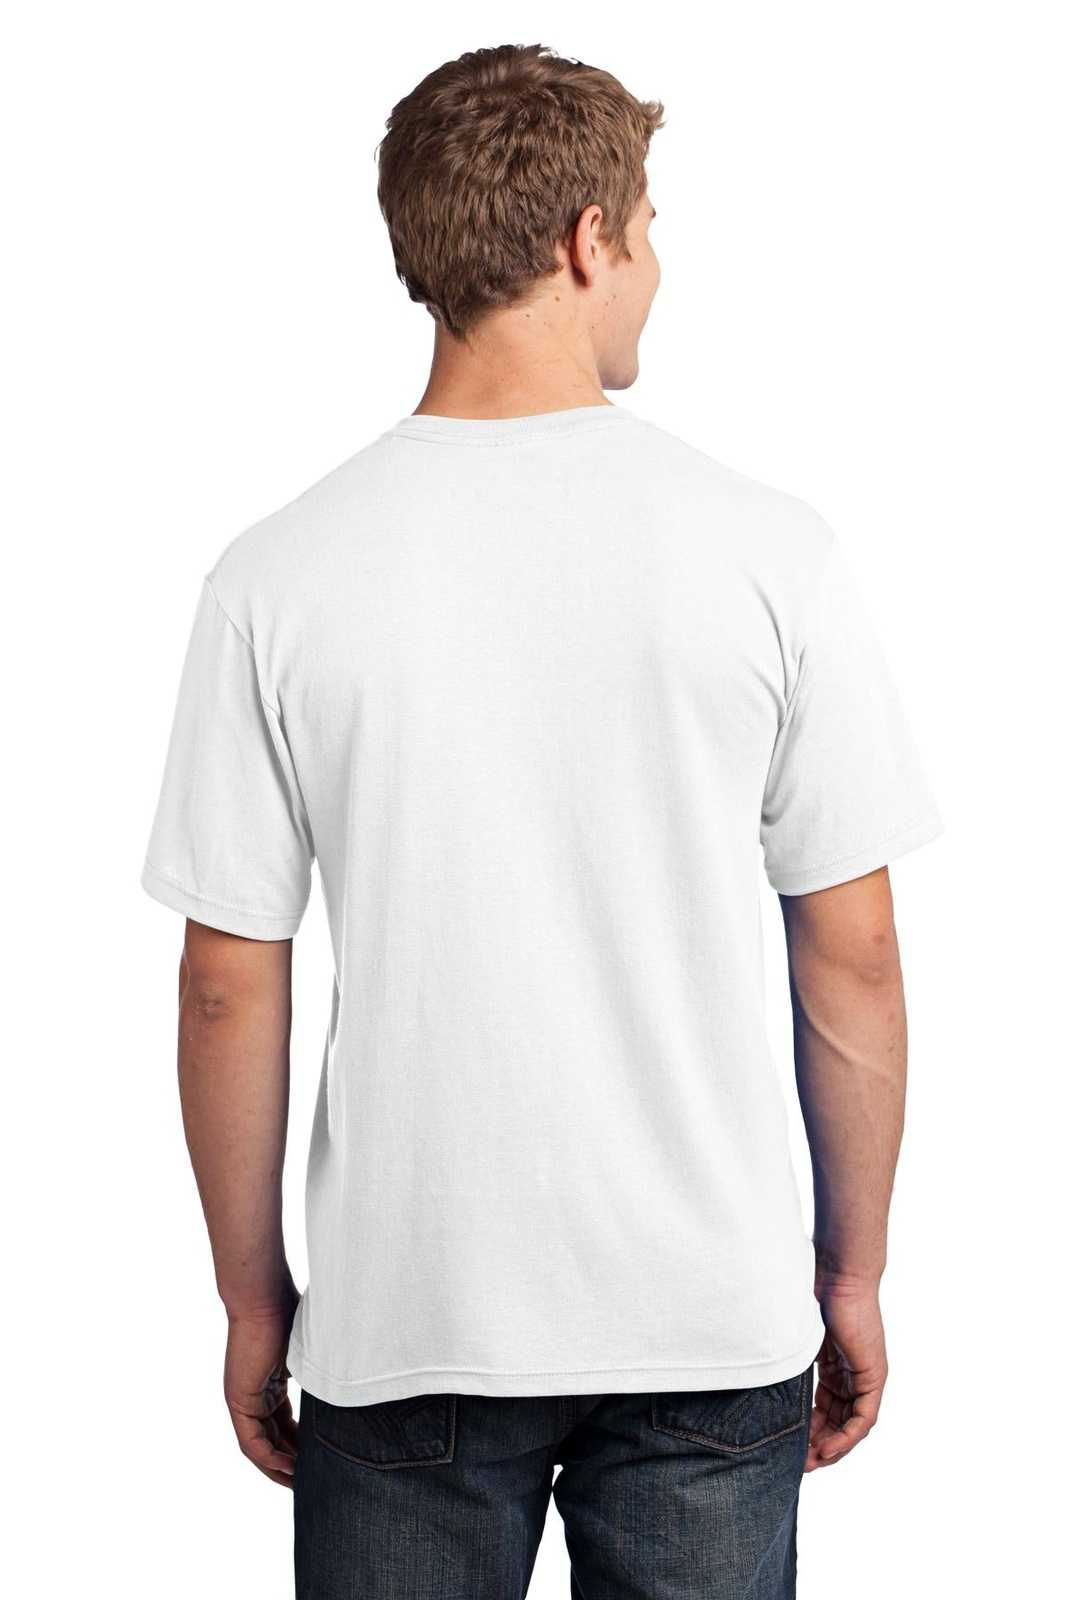 Port & Company USA100P All-American Pocket Tee - White - HIT a Double - 1